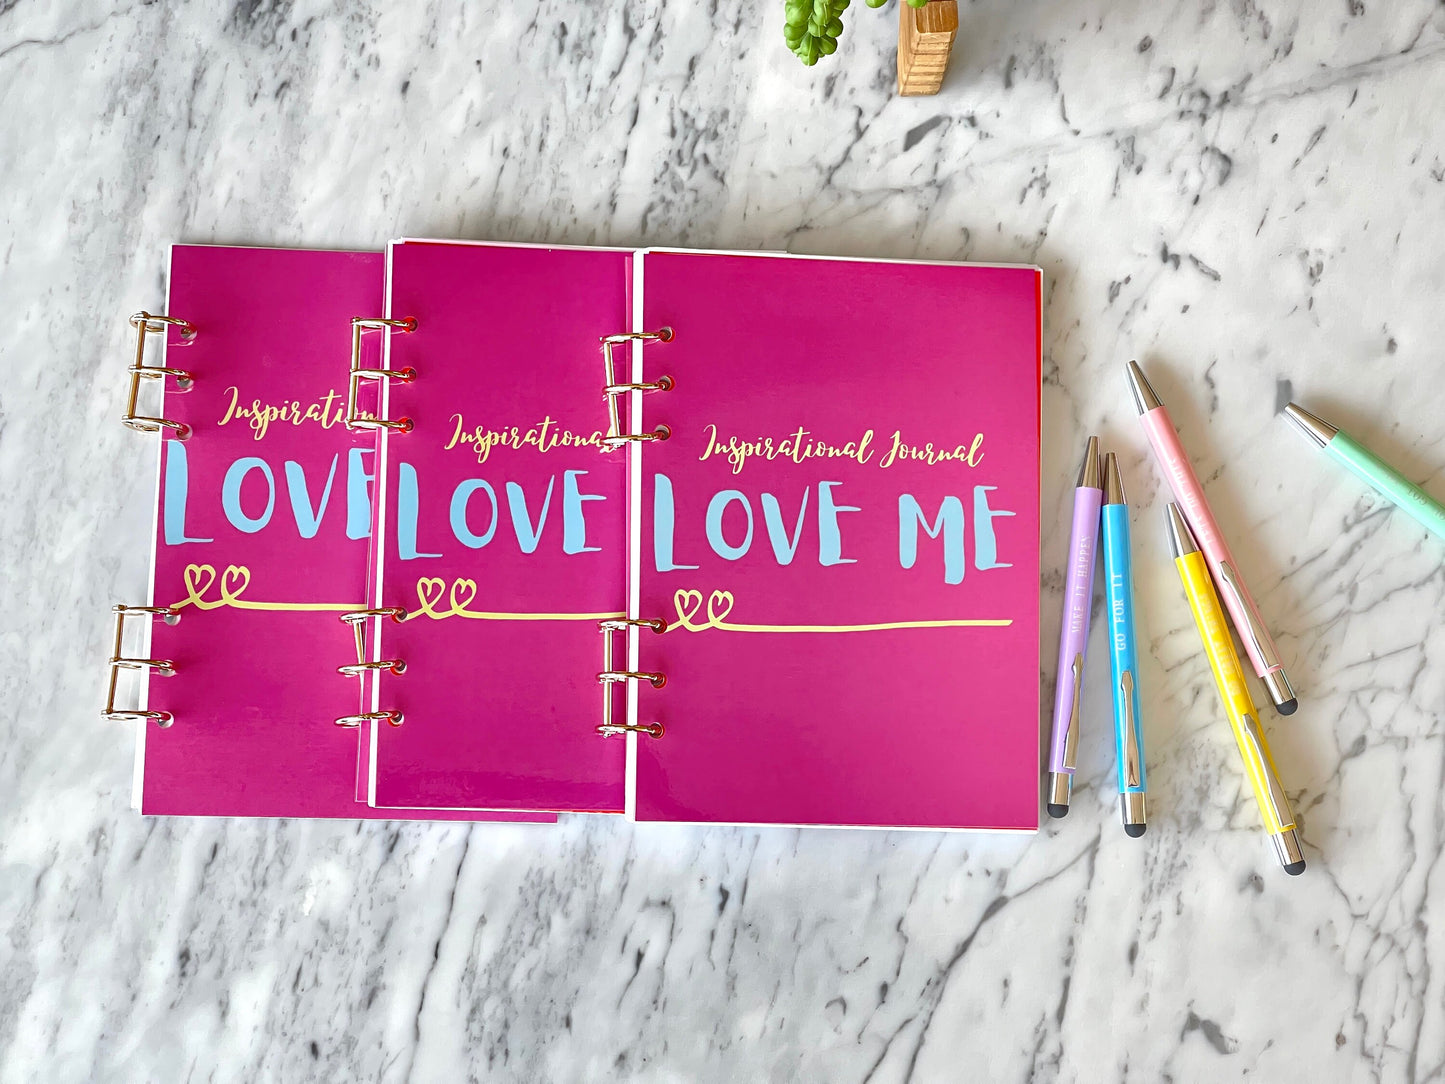 INSPIRING JOURNAL "Love me" custom unique quotes refillable artsy motivational pink A5 size + pen notebook diary dated lined spiral handmade